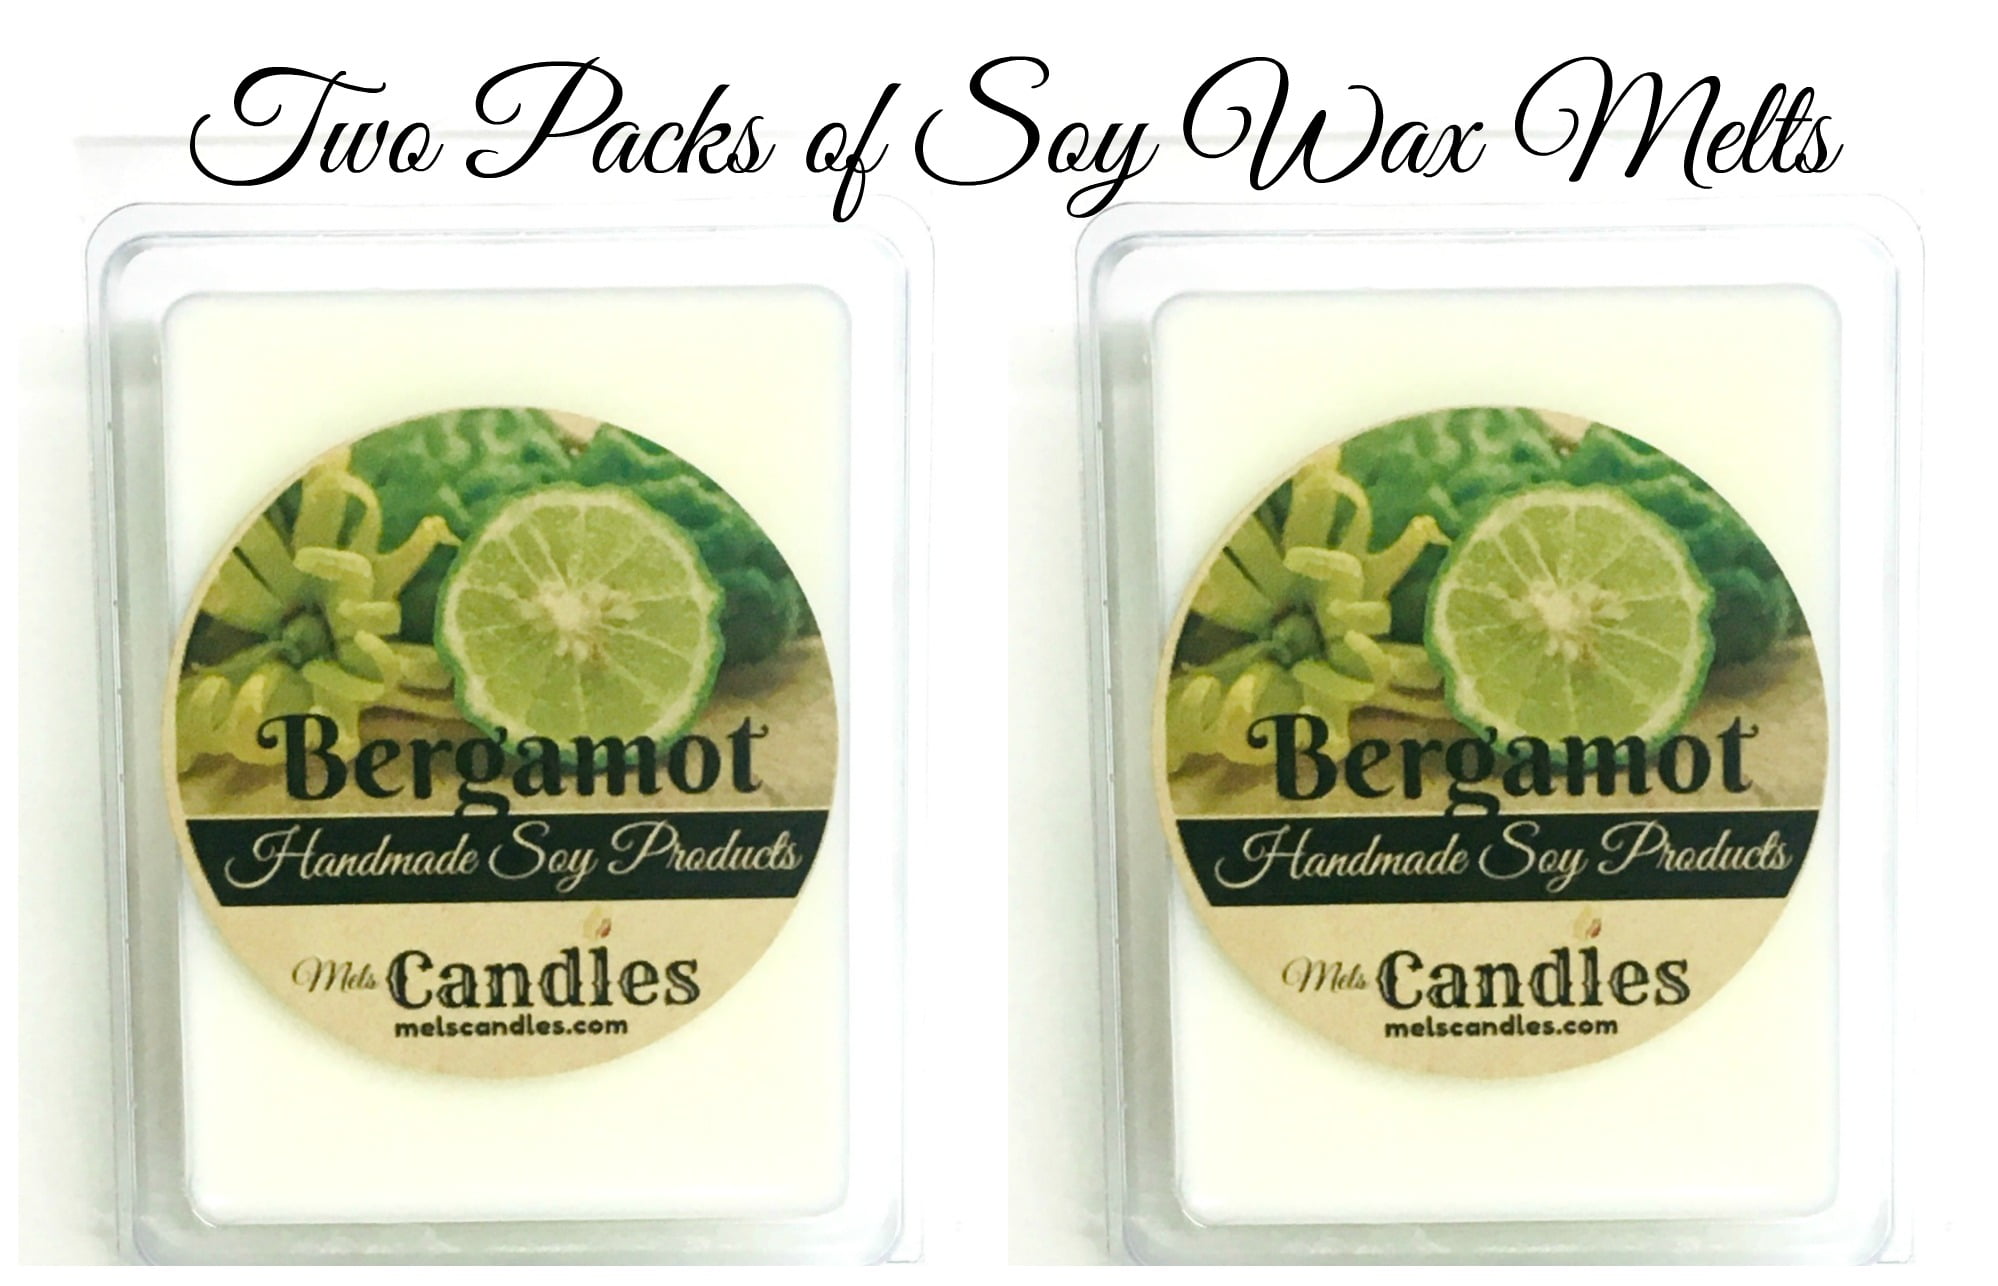 Bergamot 3.2 Ounce Pack of 100% Soy Mels Melts Scented Wax 